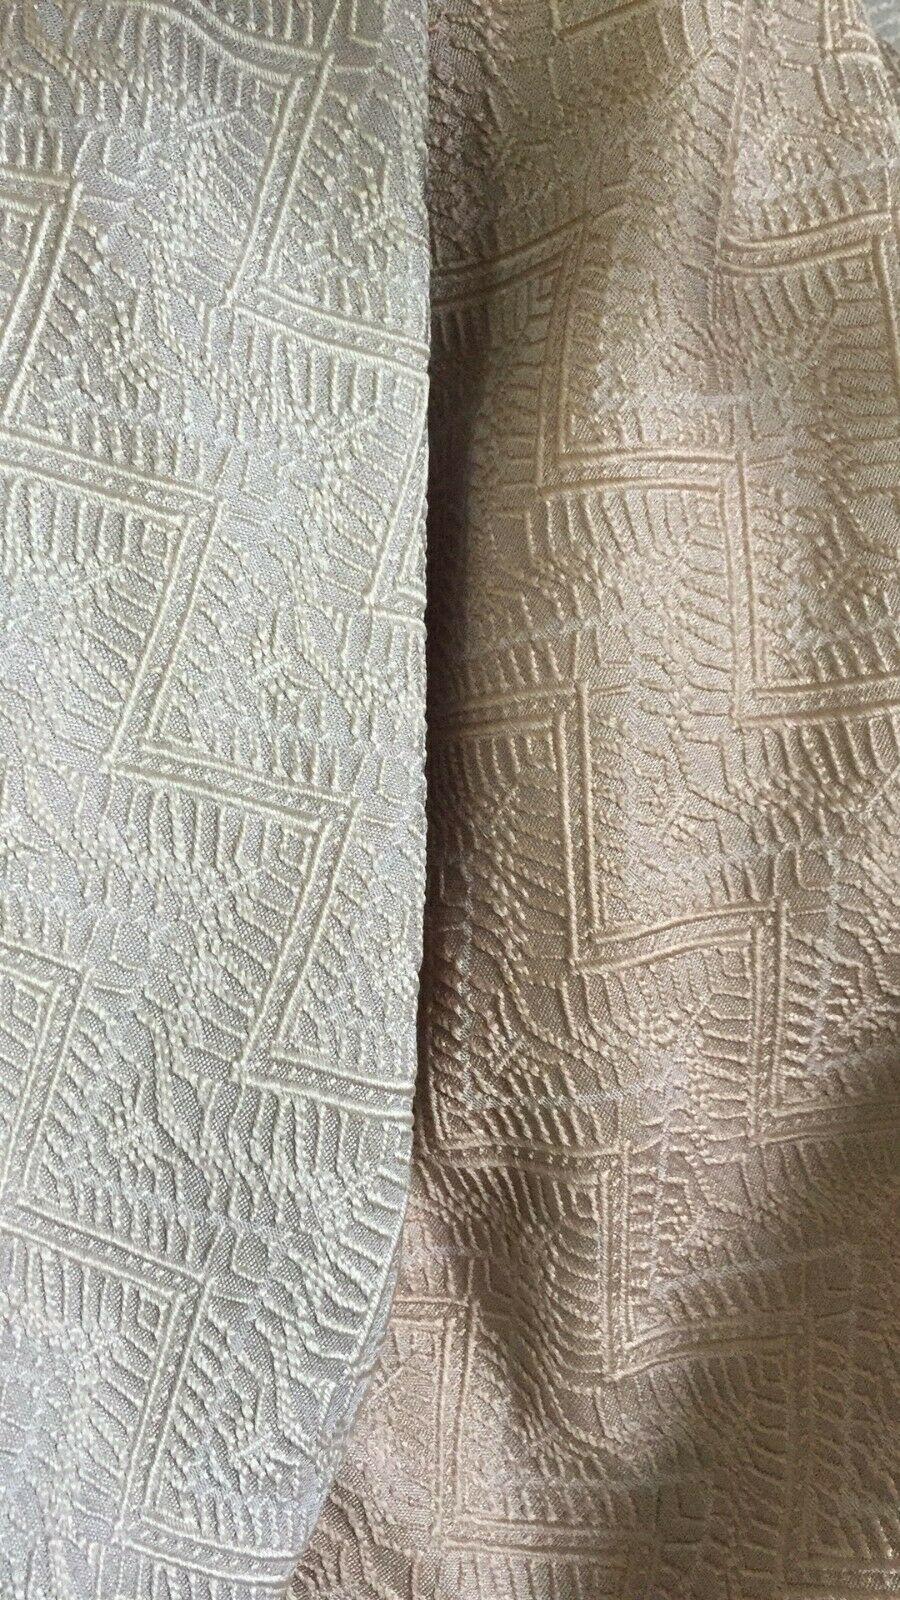 Curtain Upholstery Jacquard ONLY £19.99 per M fabric 300cm/118" Beige&Vintage